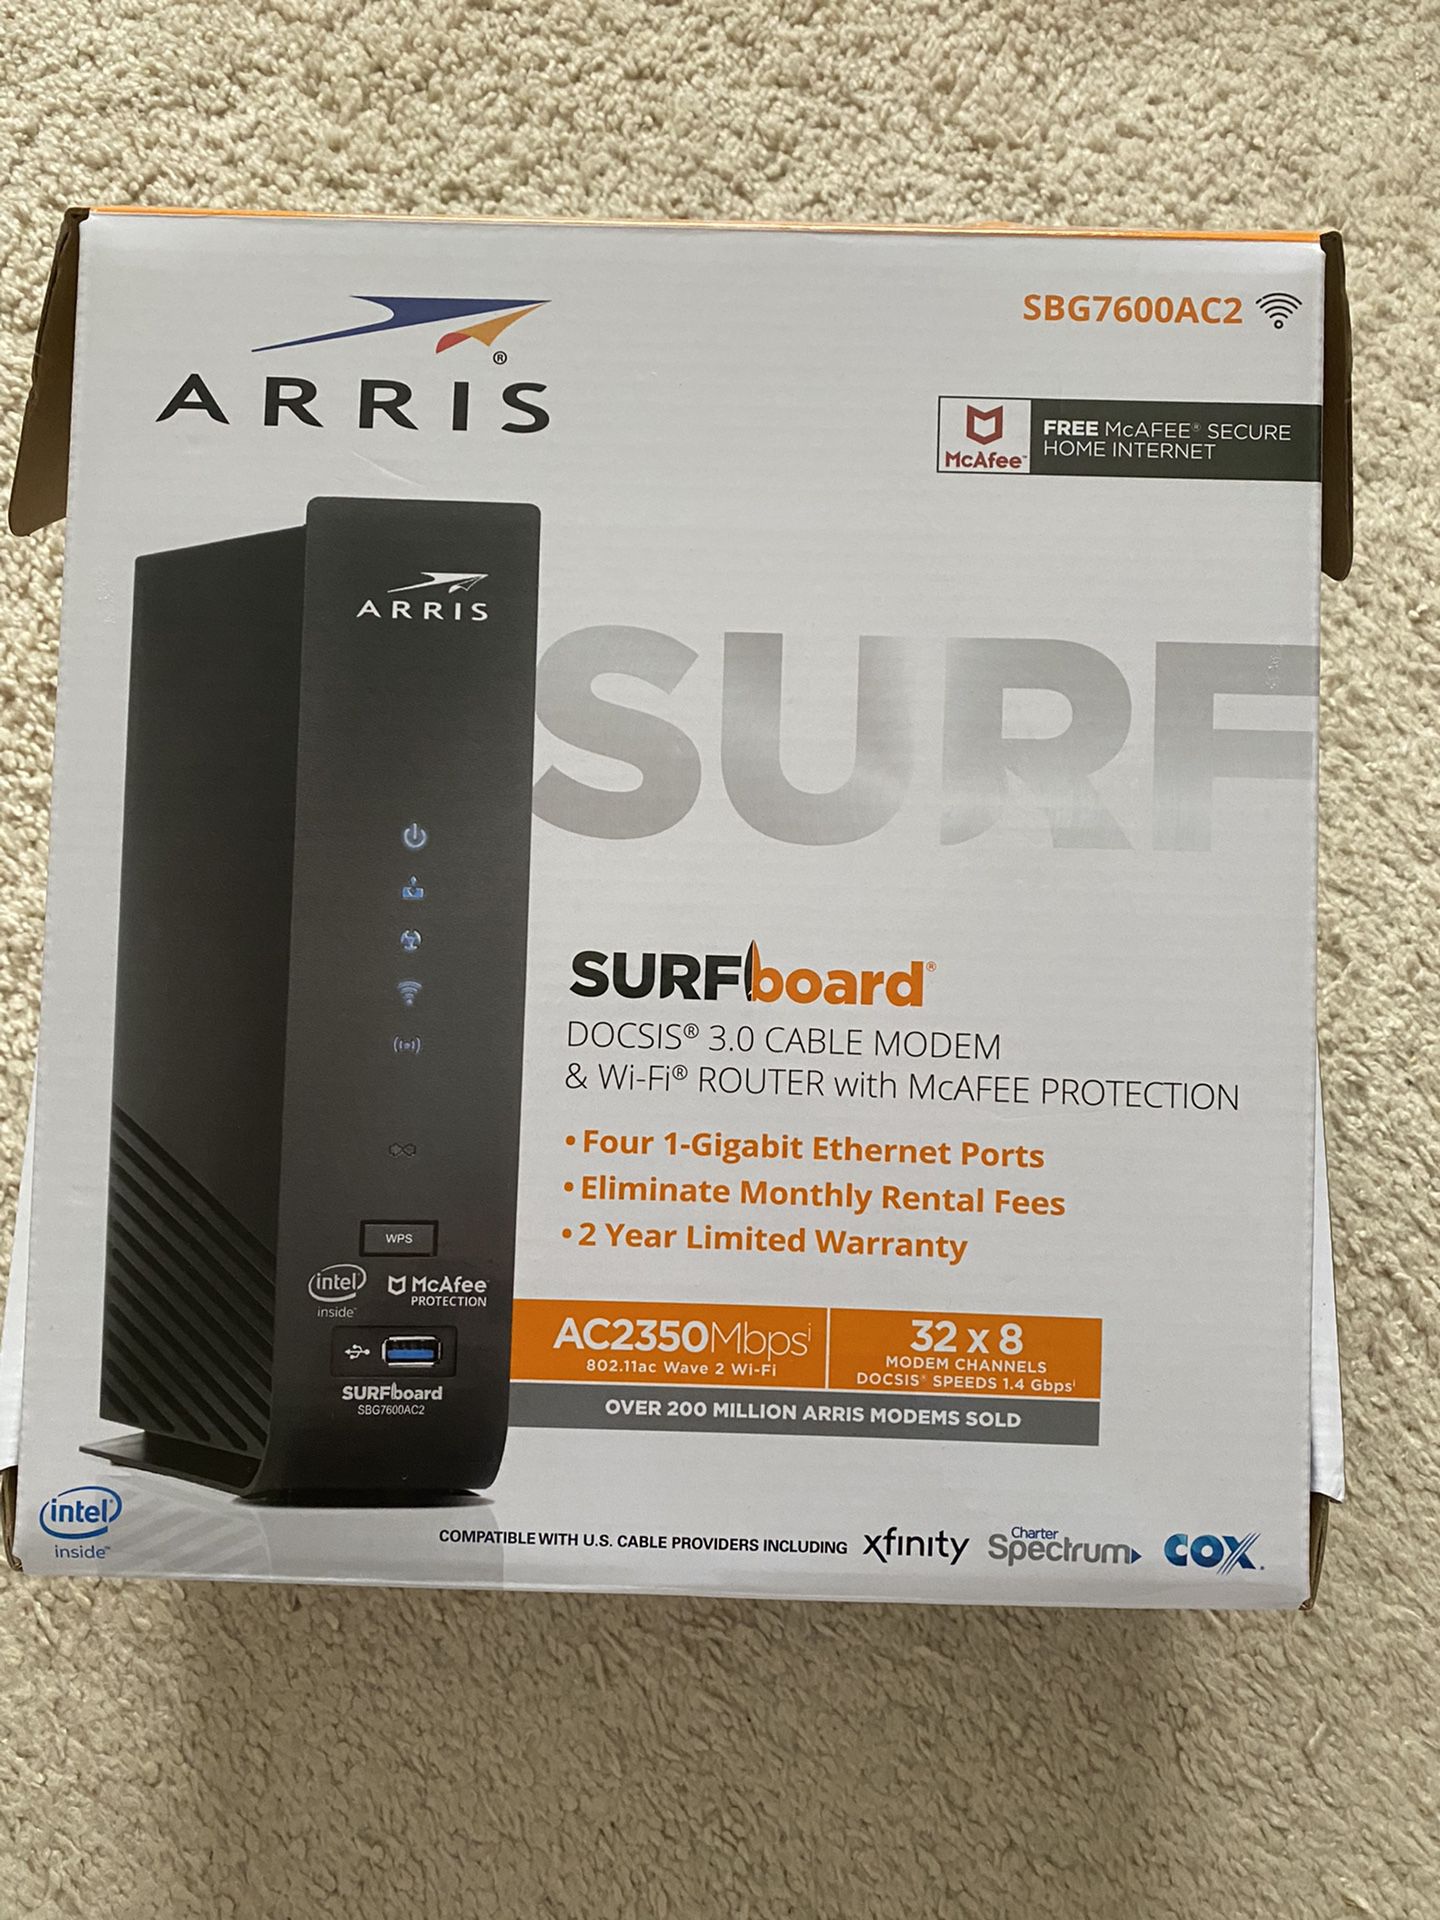 ARRIS SURFboard SBG7600AC2 DOCSIS 3.0 Cable Modem AC2350 Dual-Band Wi-Fi Router